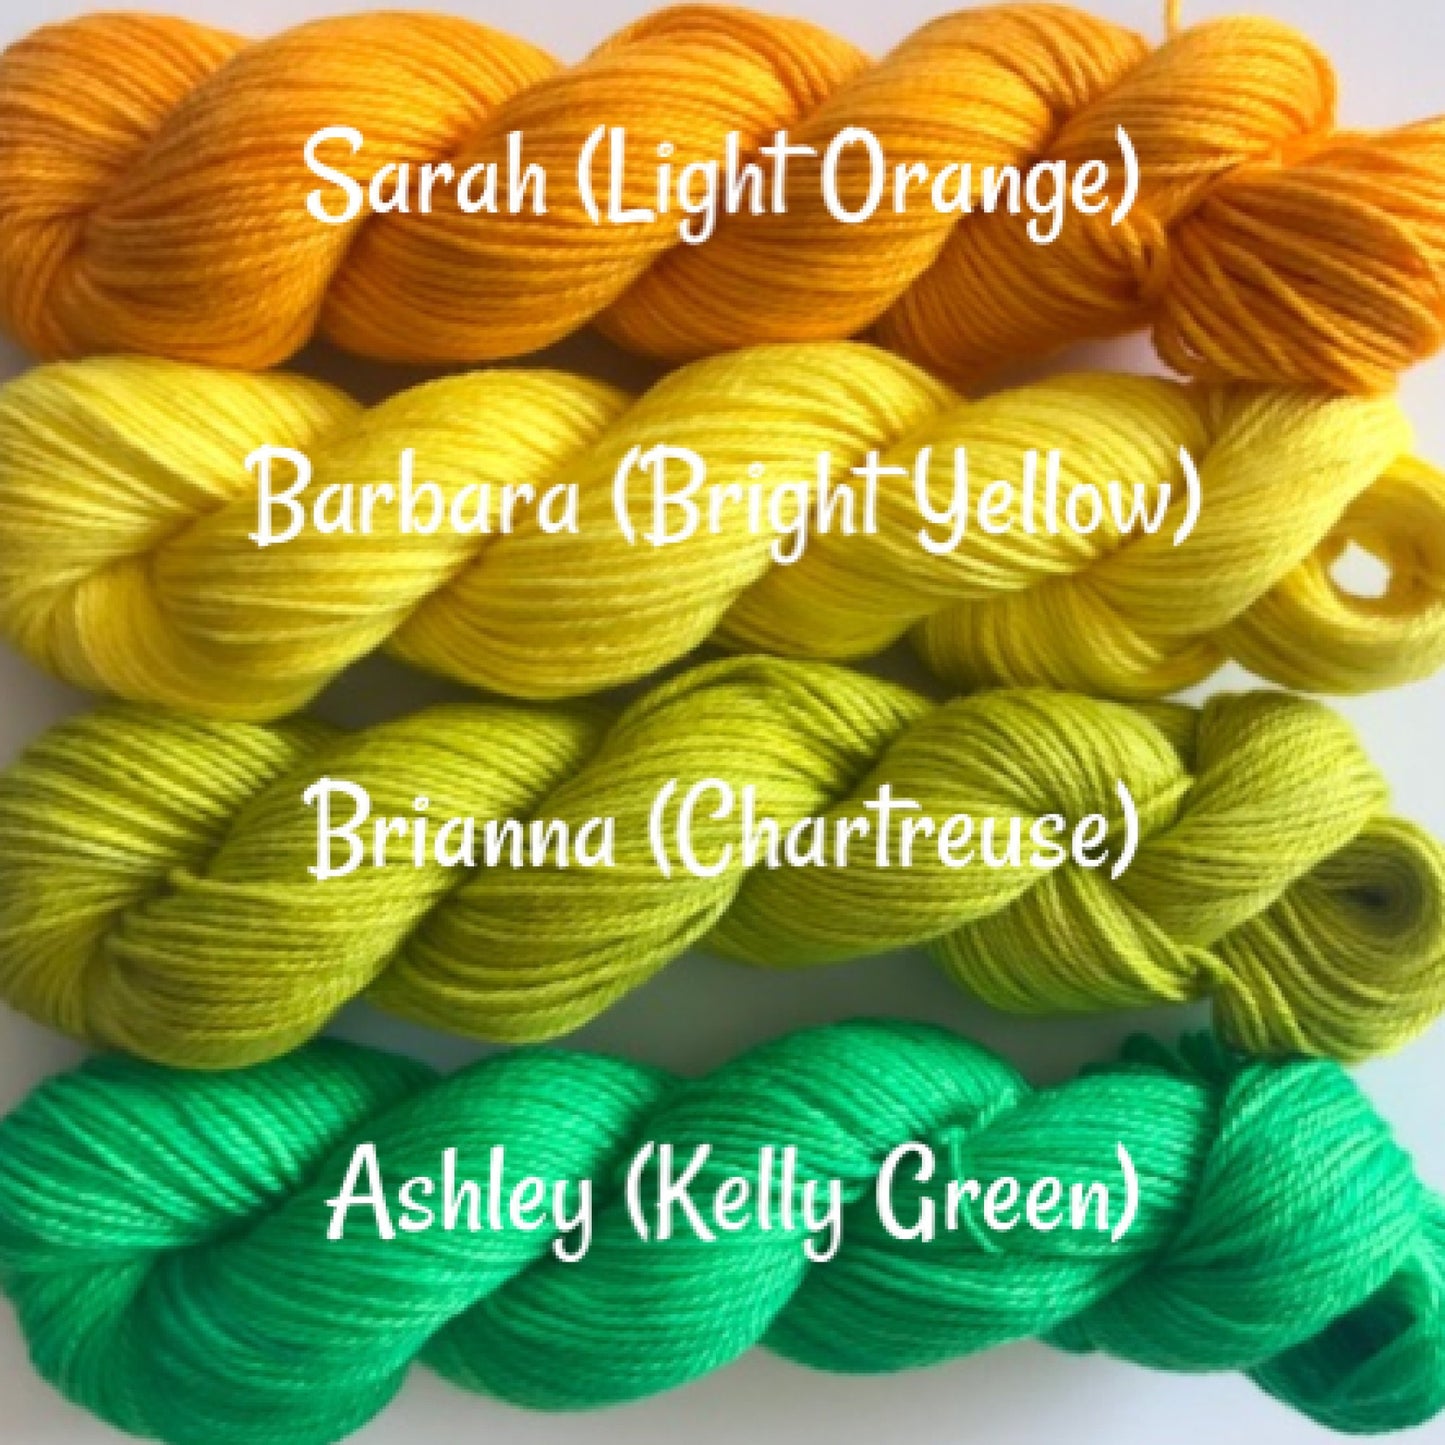 Vegan Sock / Fingering Yarn - Hand Dyed Bamboo Cotton - Choose Color & Skein Size - Orange, Yellow and Green Semi Solid - Artisan 3 Ply Yarn